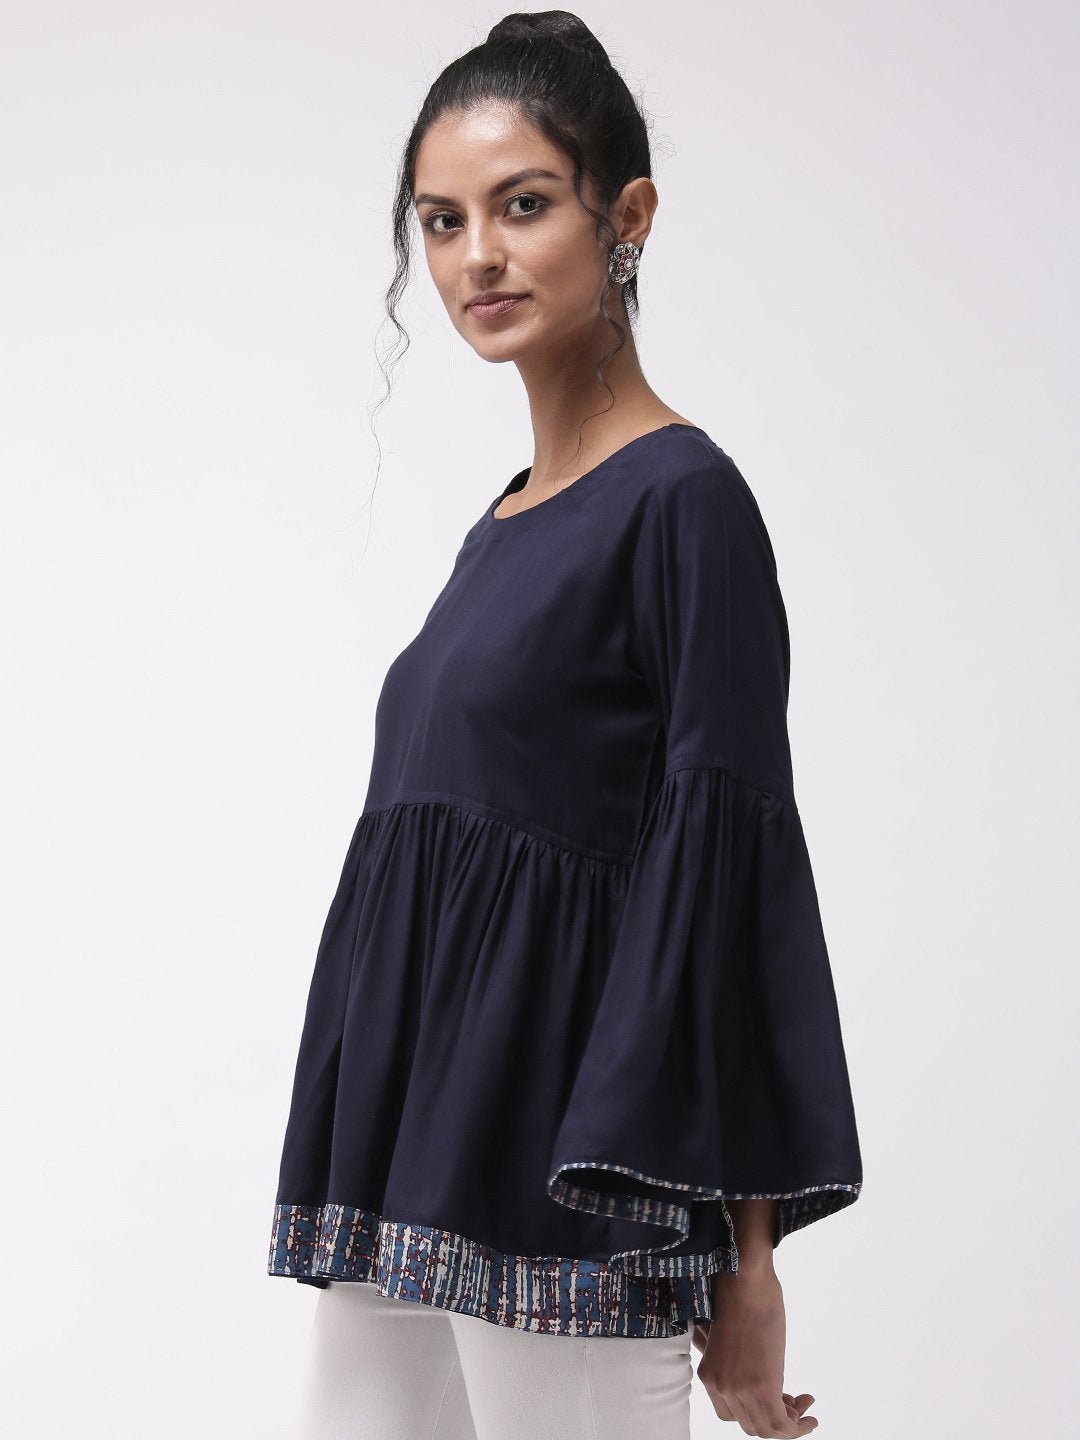 Women's Navy Blue Bell Sleeves Top With Border - InWeave